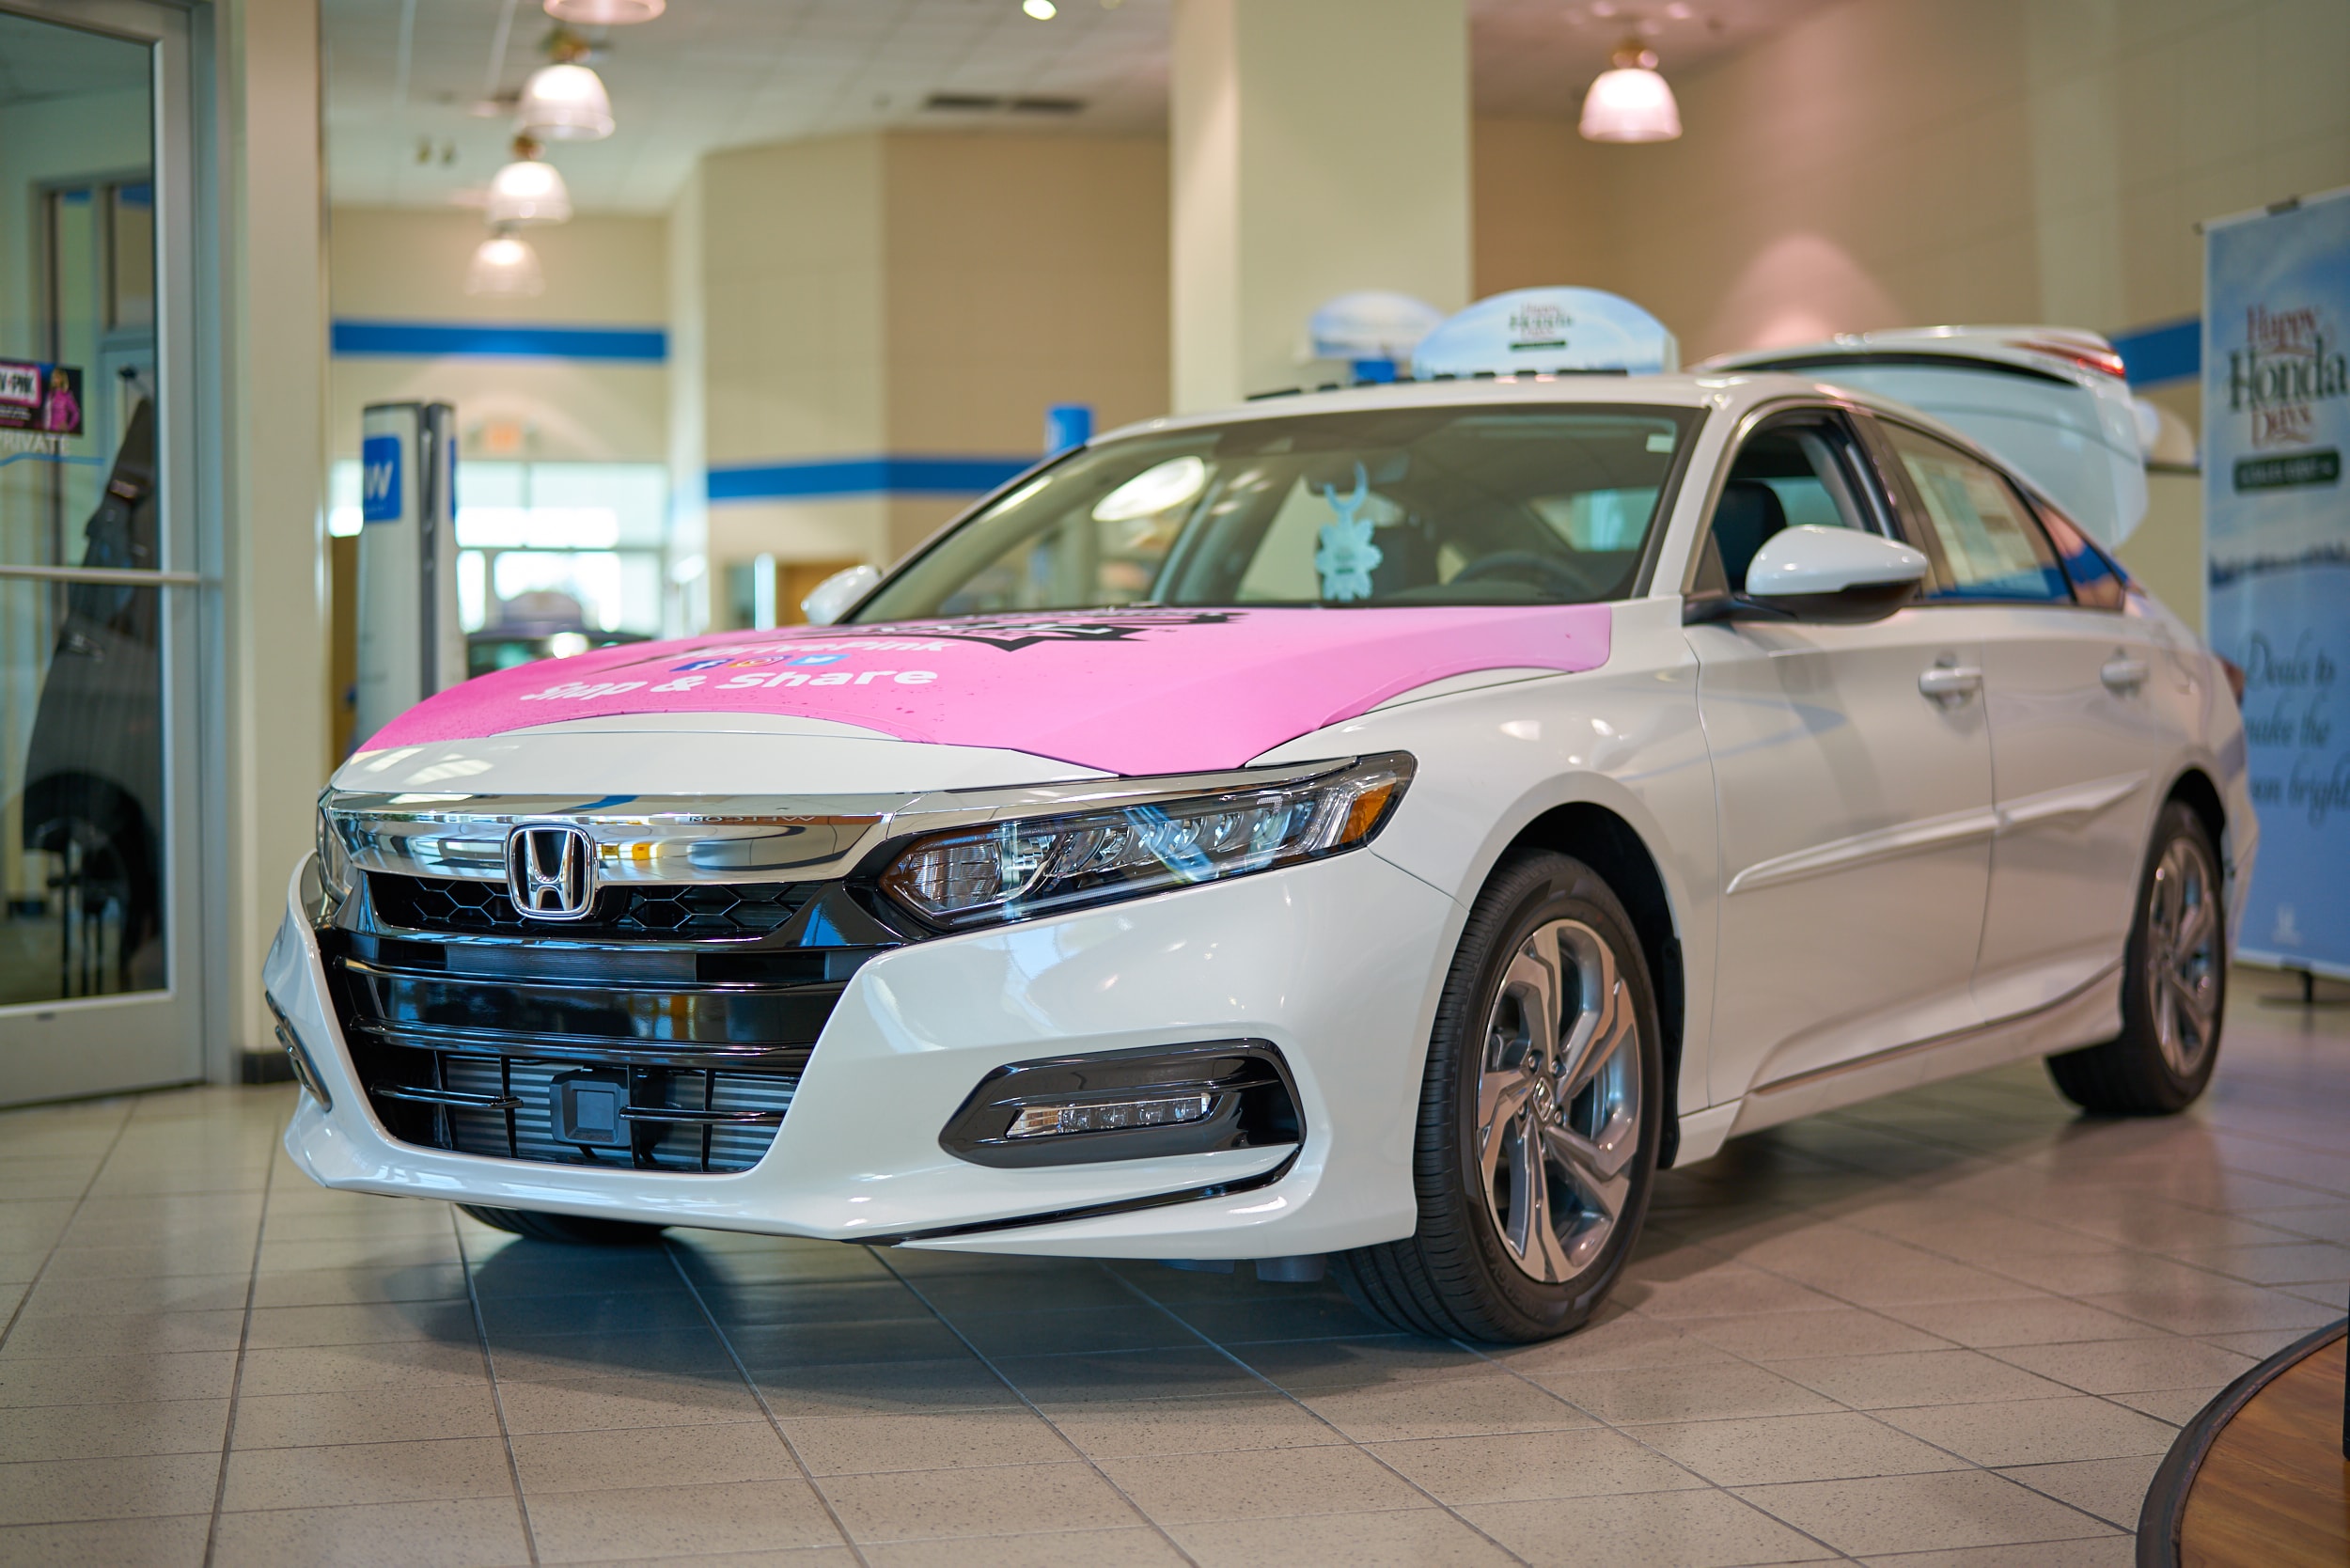 About AutoNation Honda West Knoxville Knoxville, TN